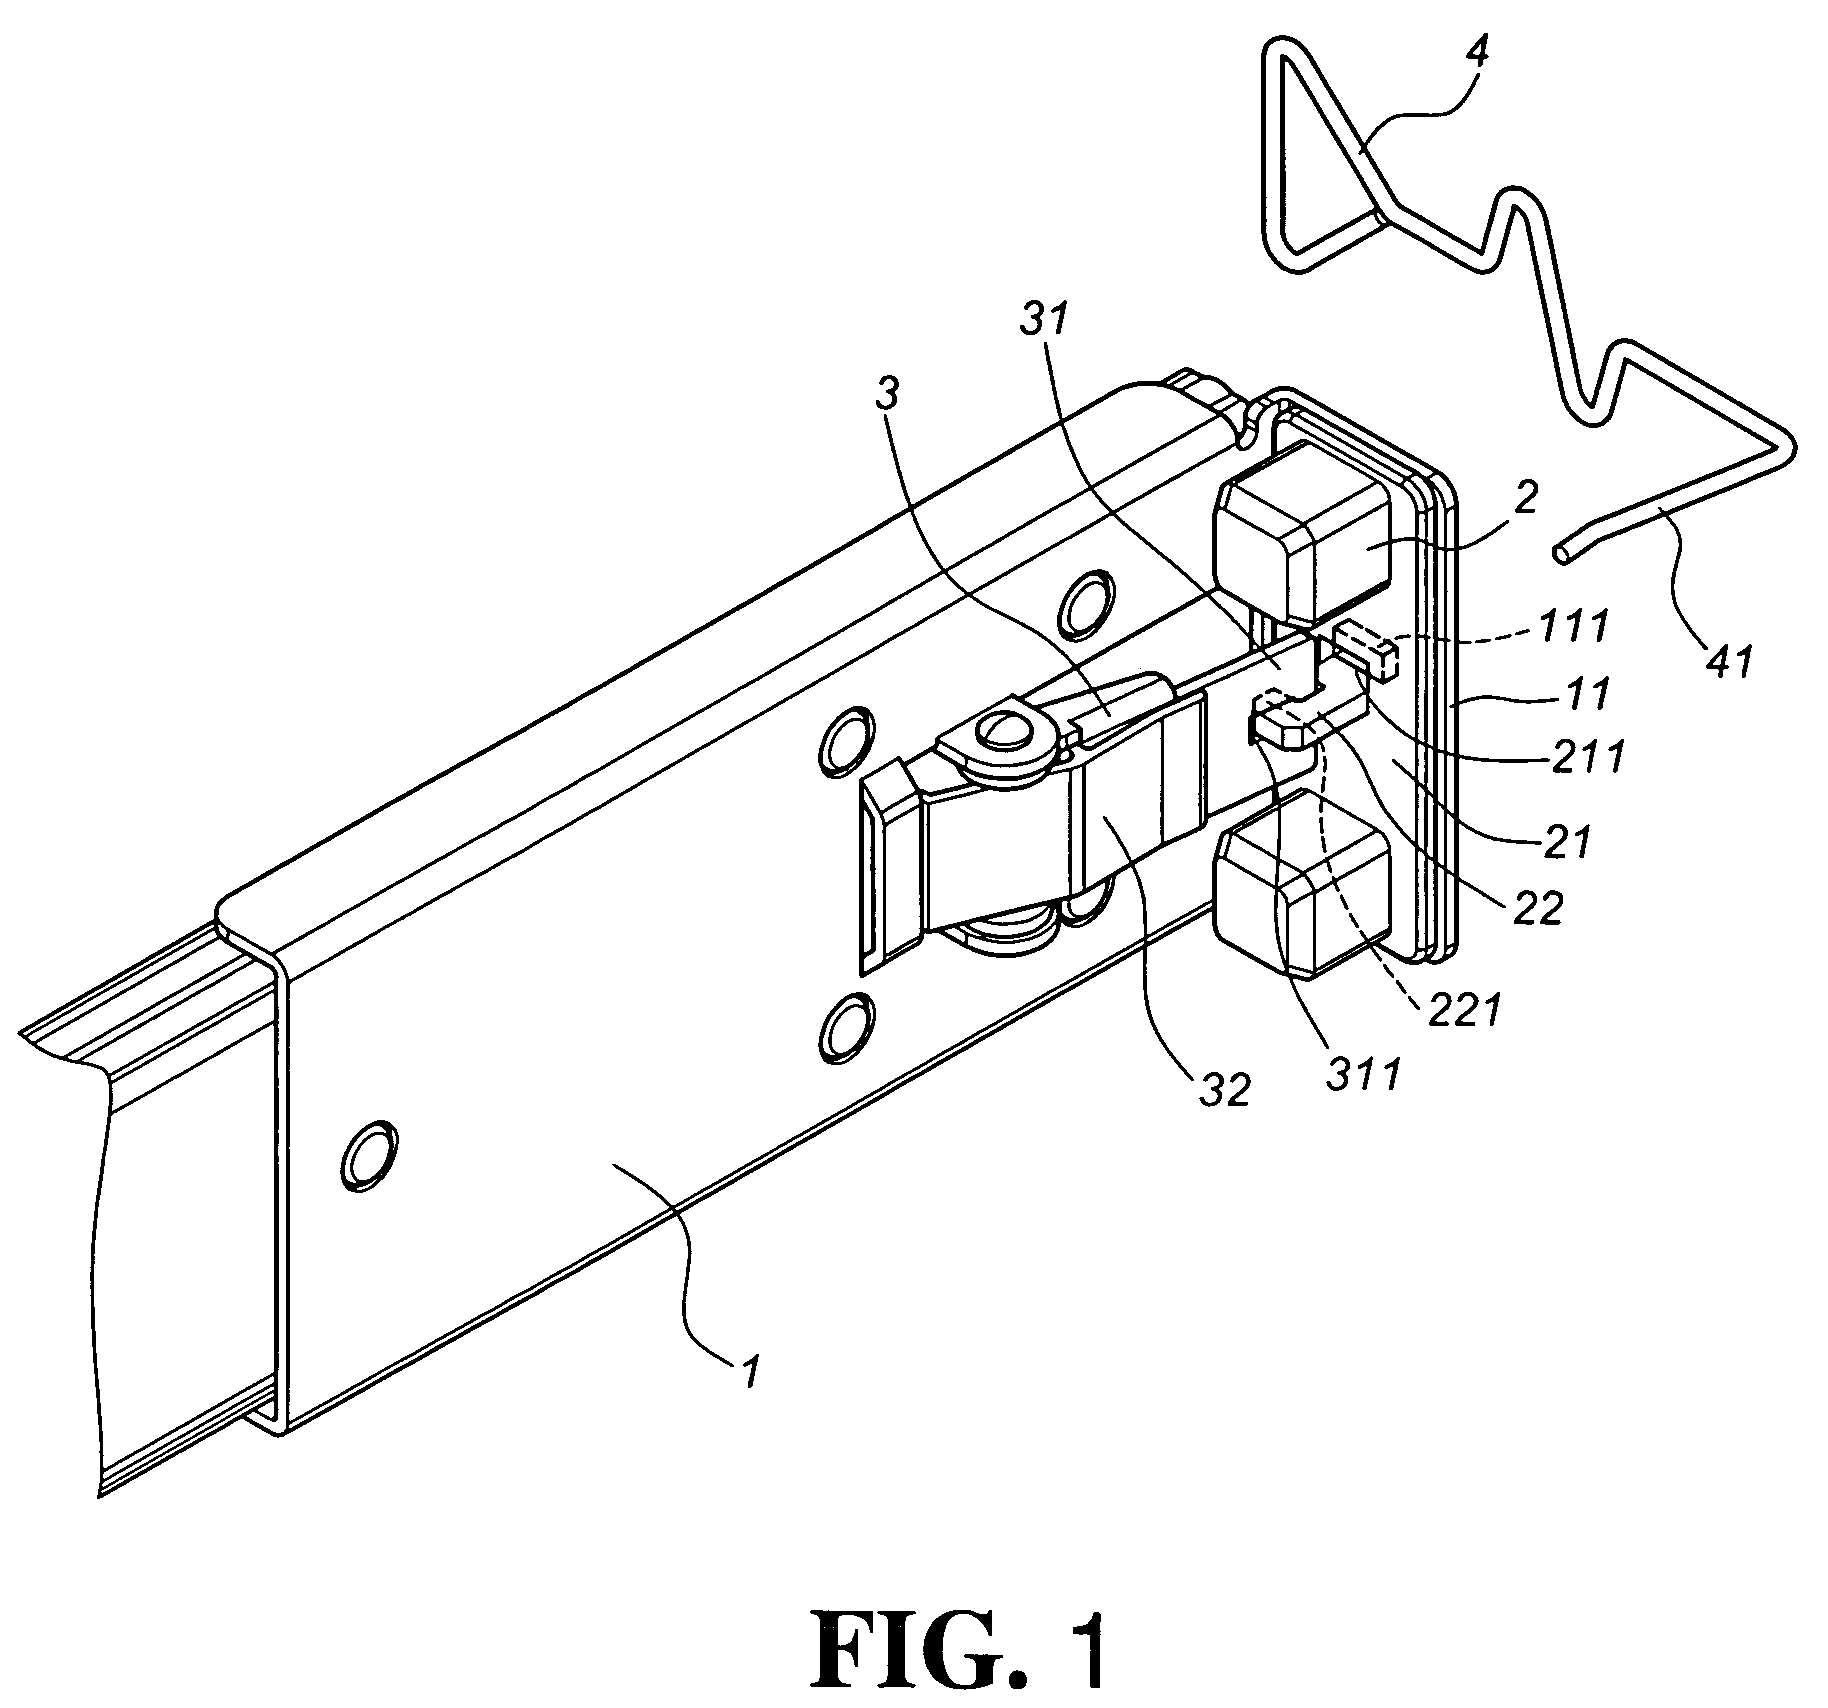 Slide bracket allowing front access for dismounting